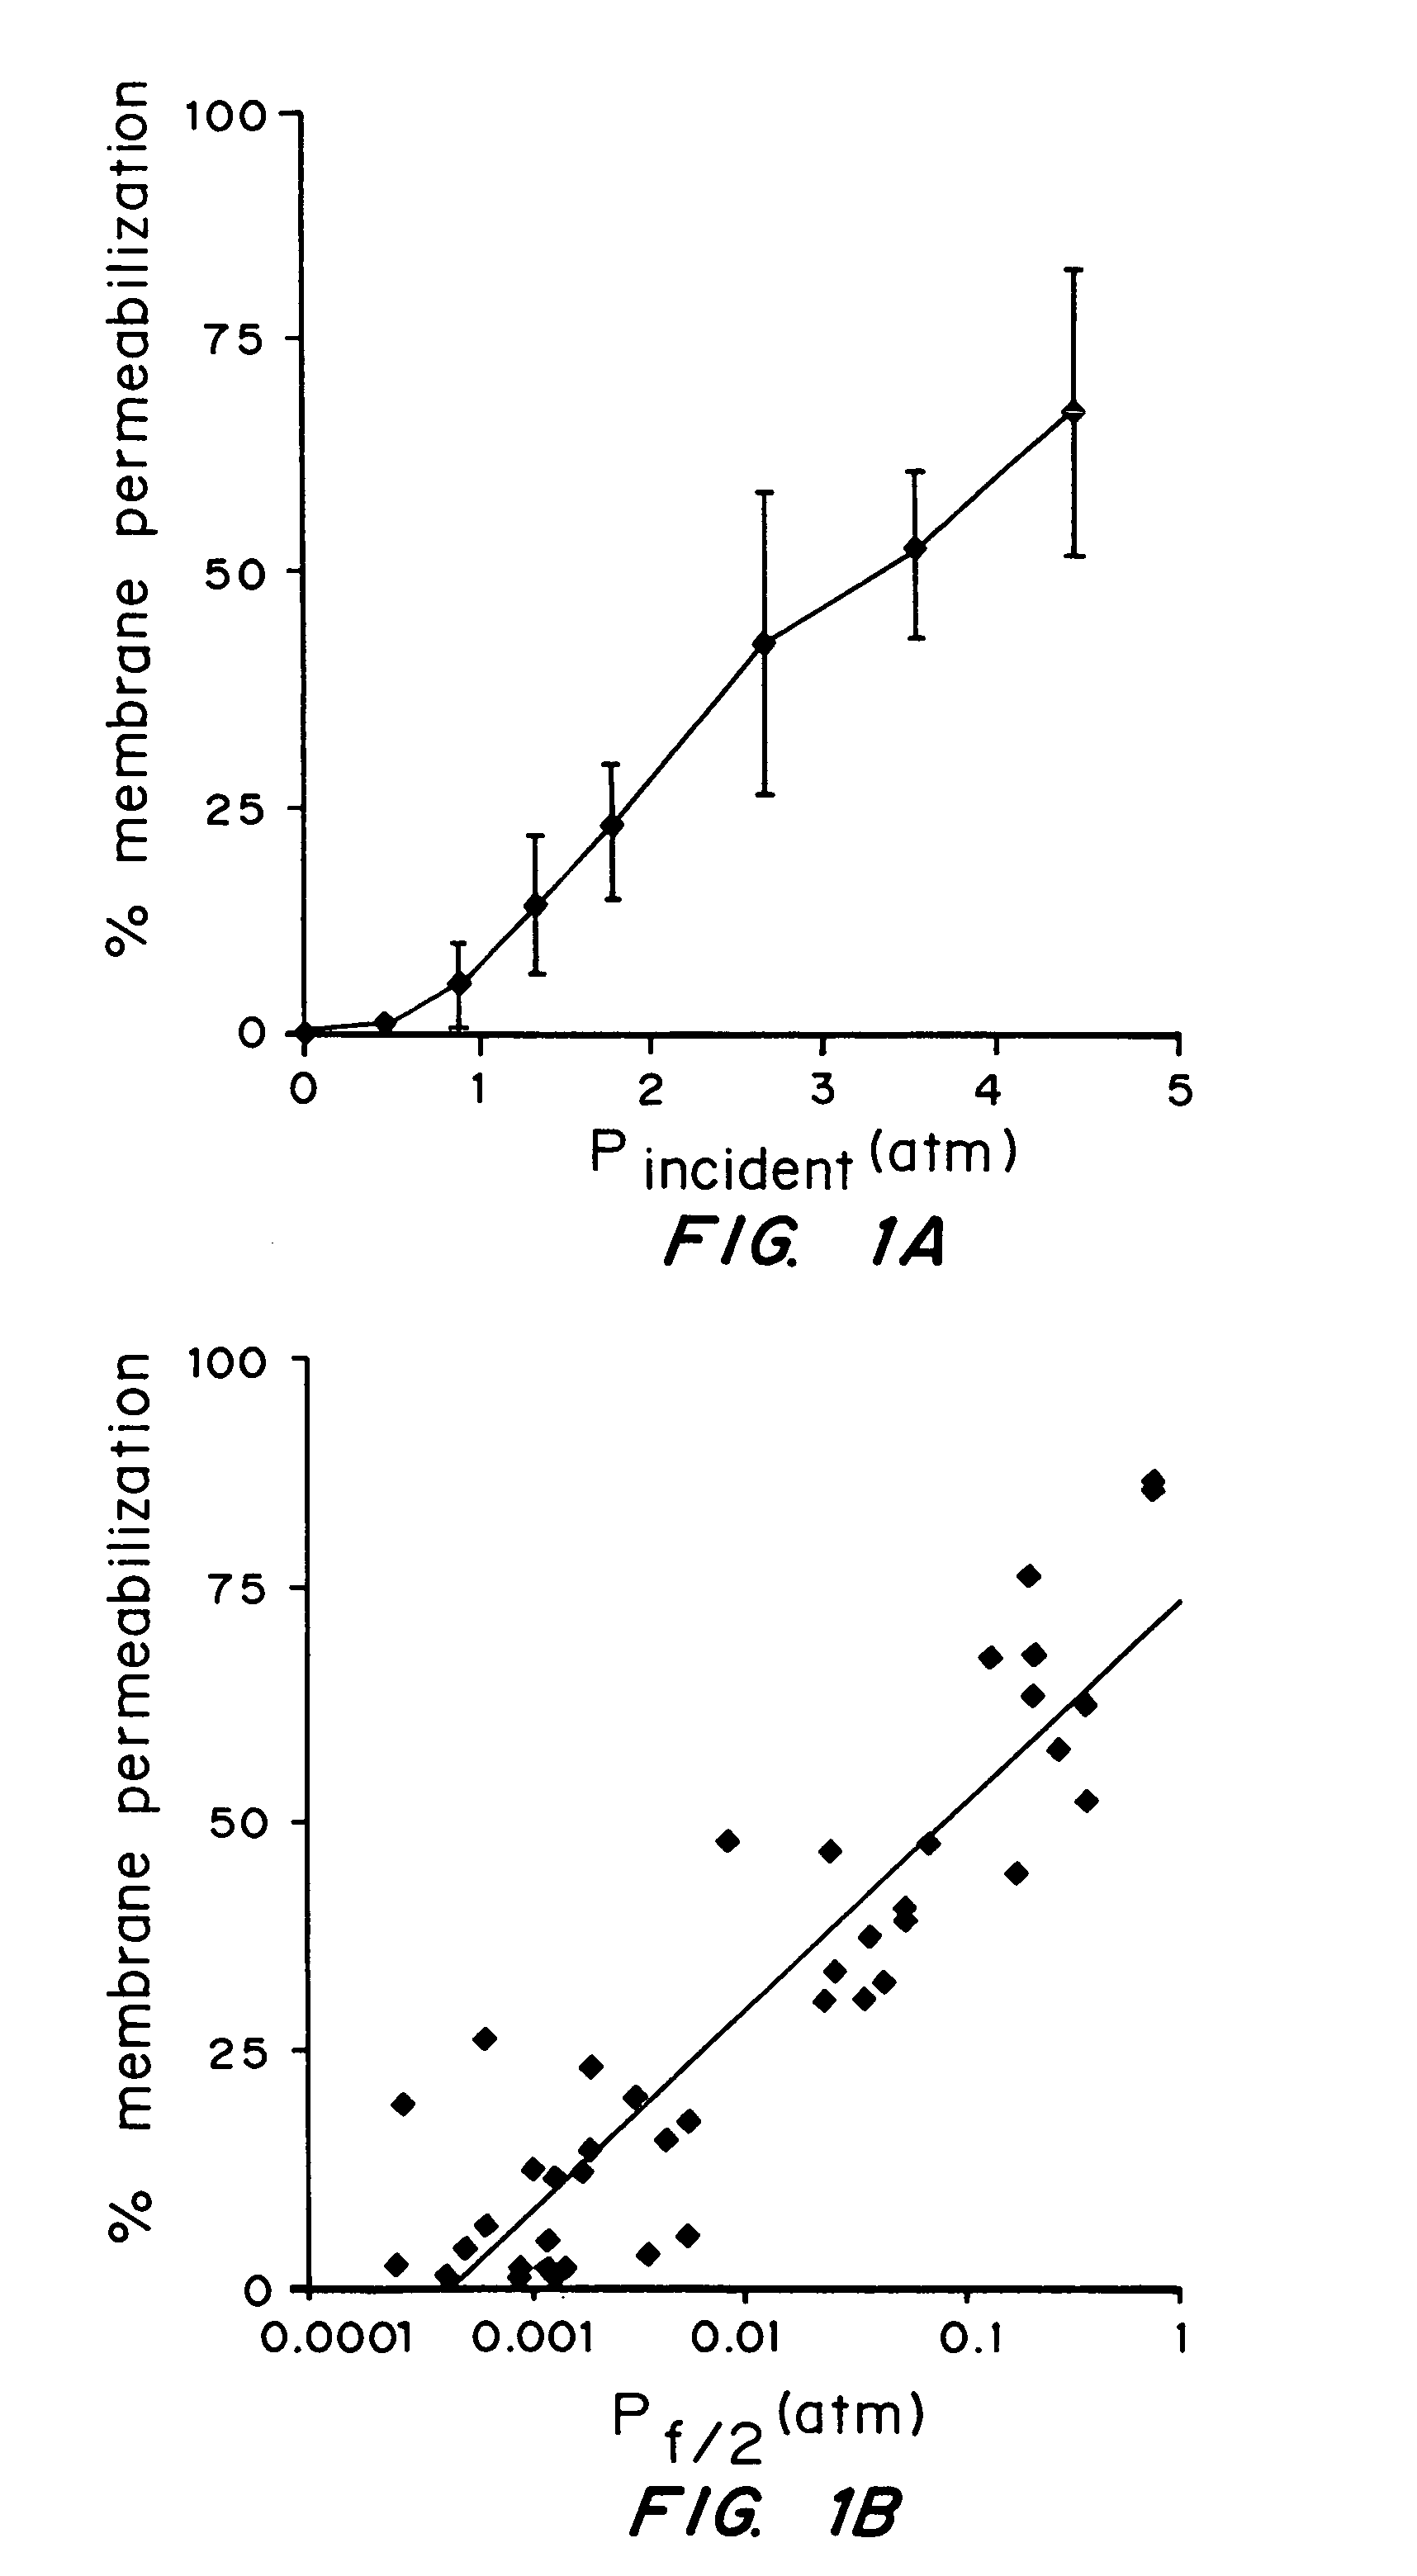 Method of applying acoustic energy effective to alter transport or cell viability